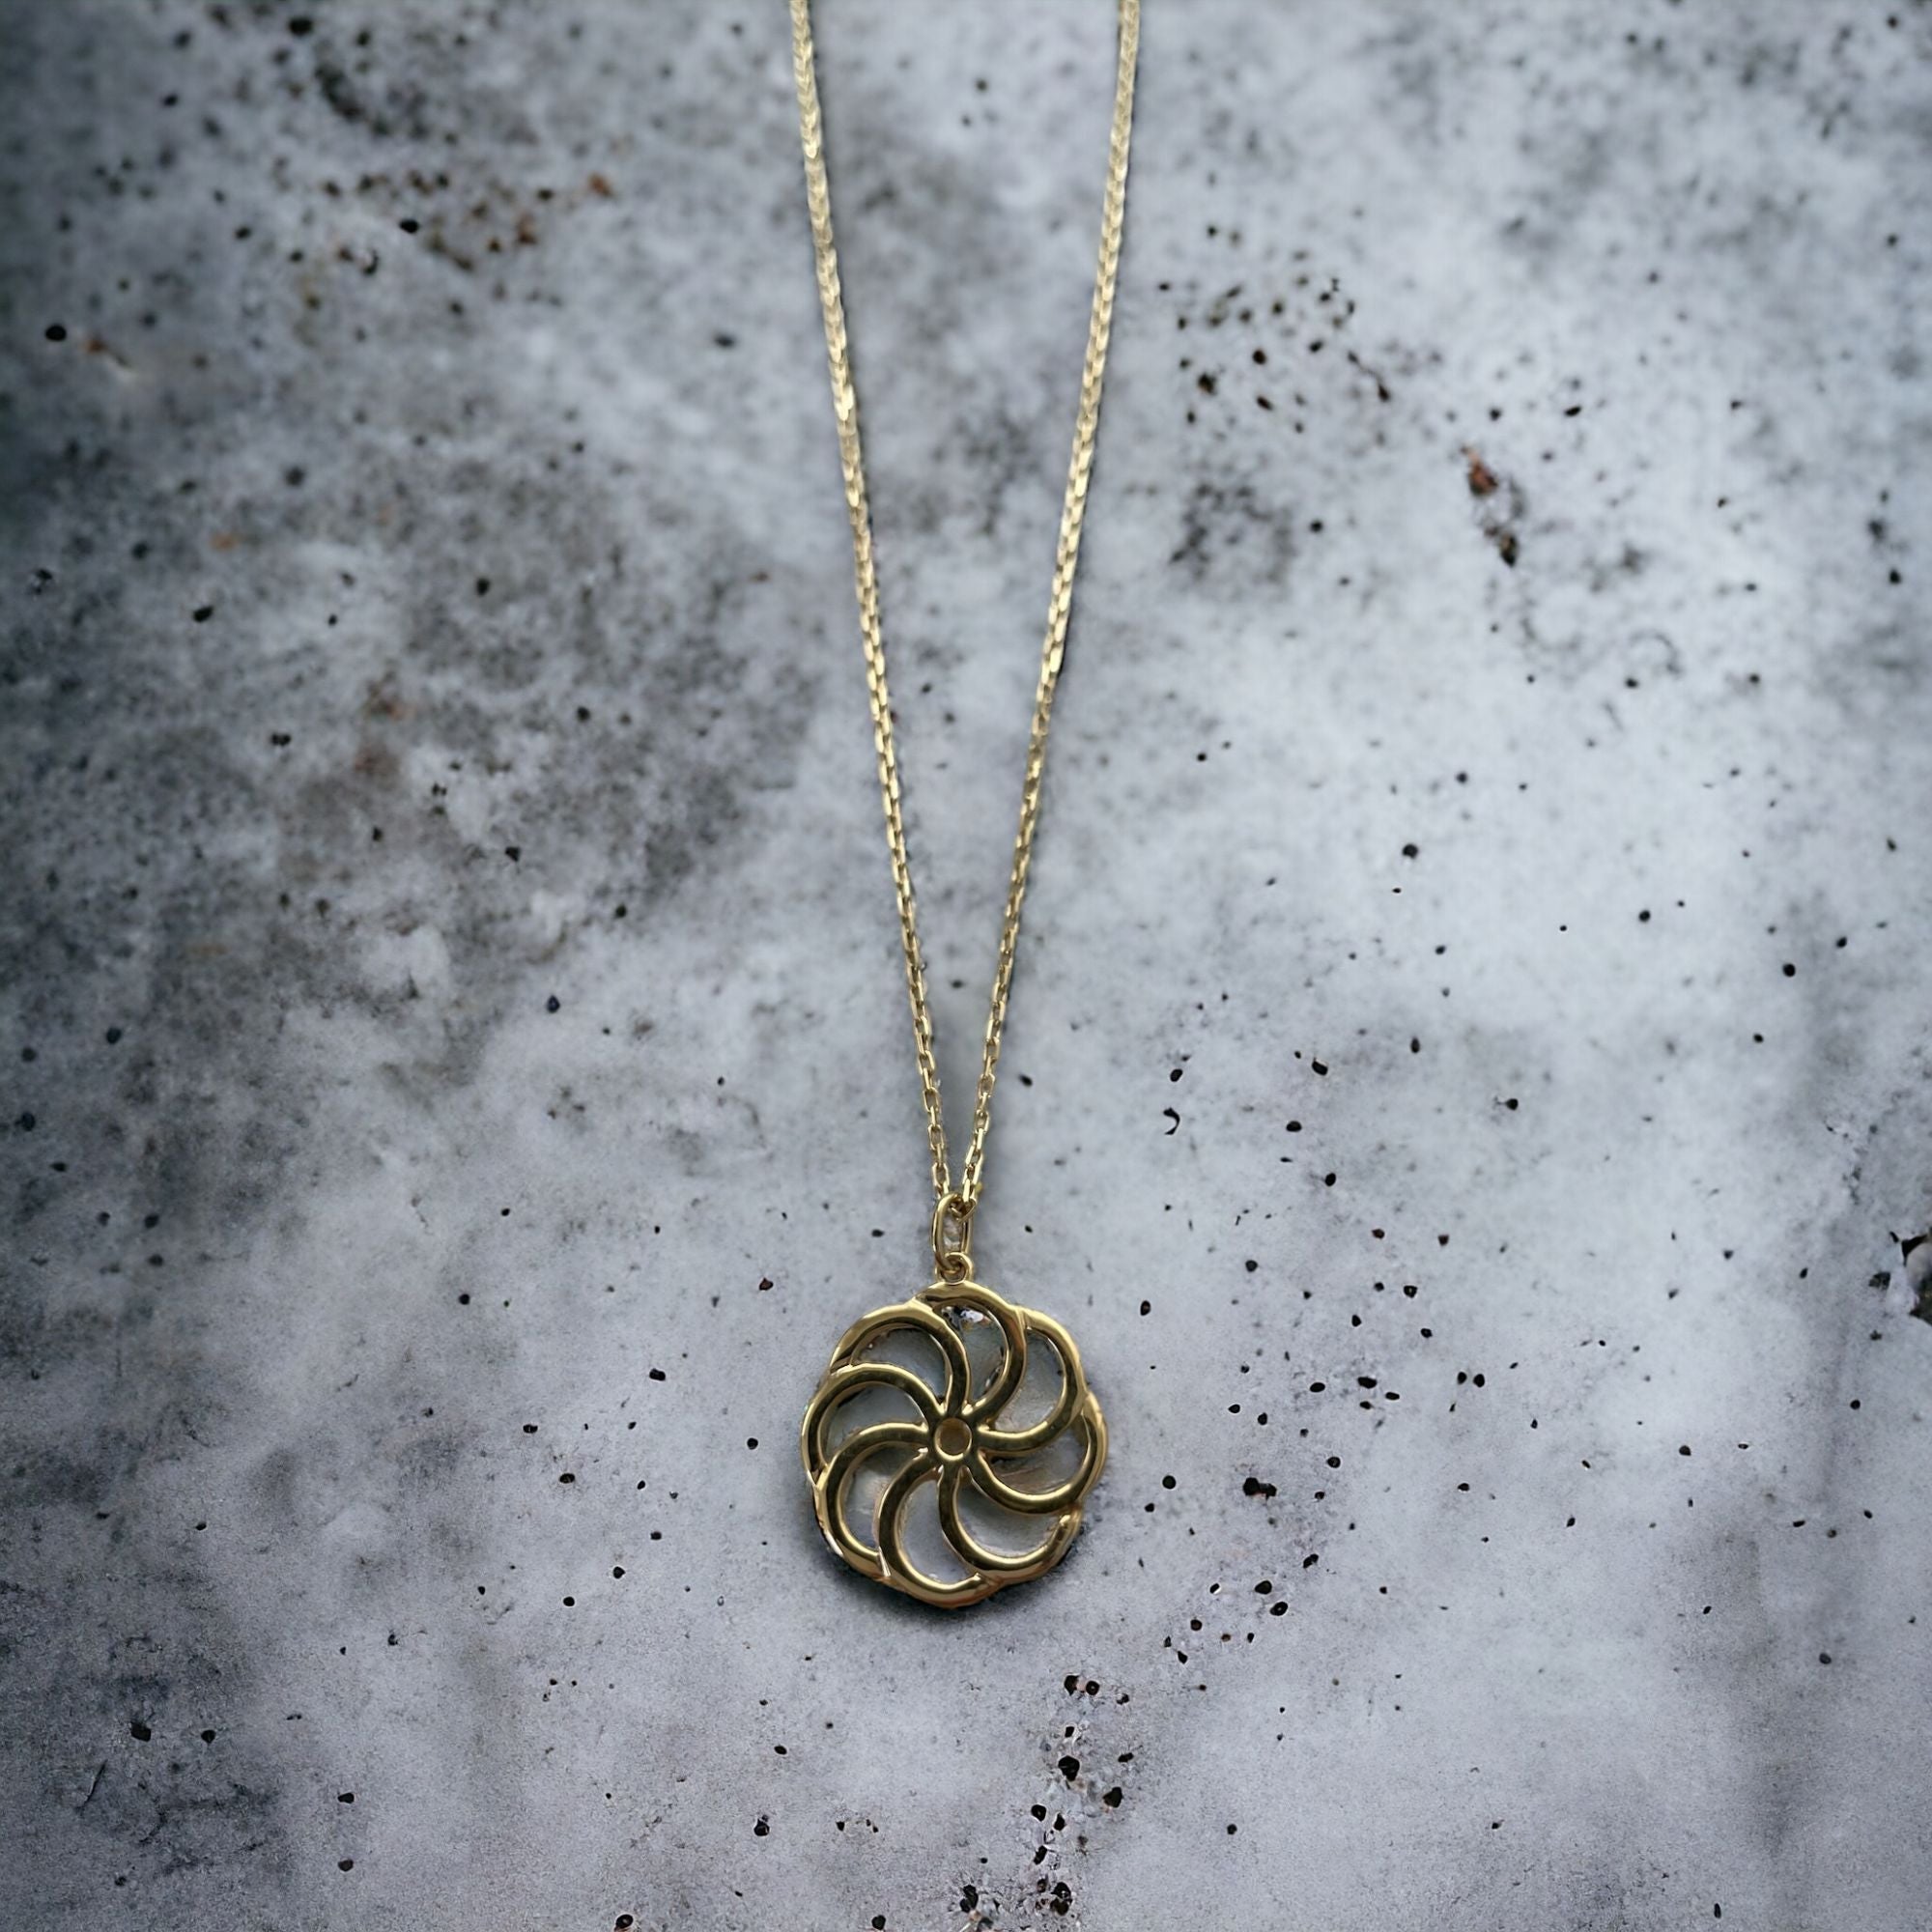 Eternity Sign Necklace by Carisma Jewelry